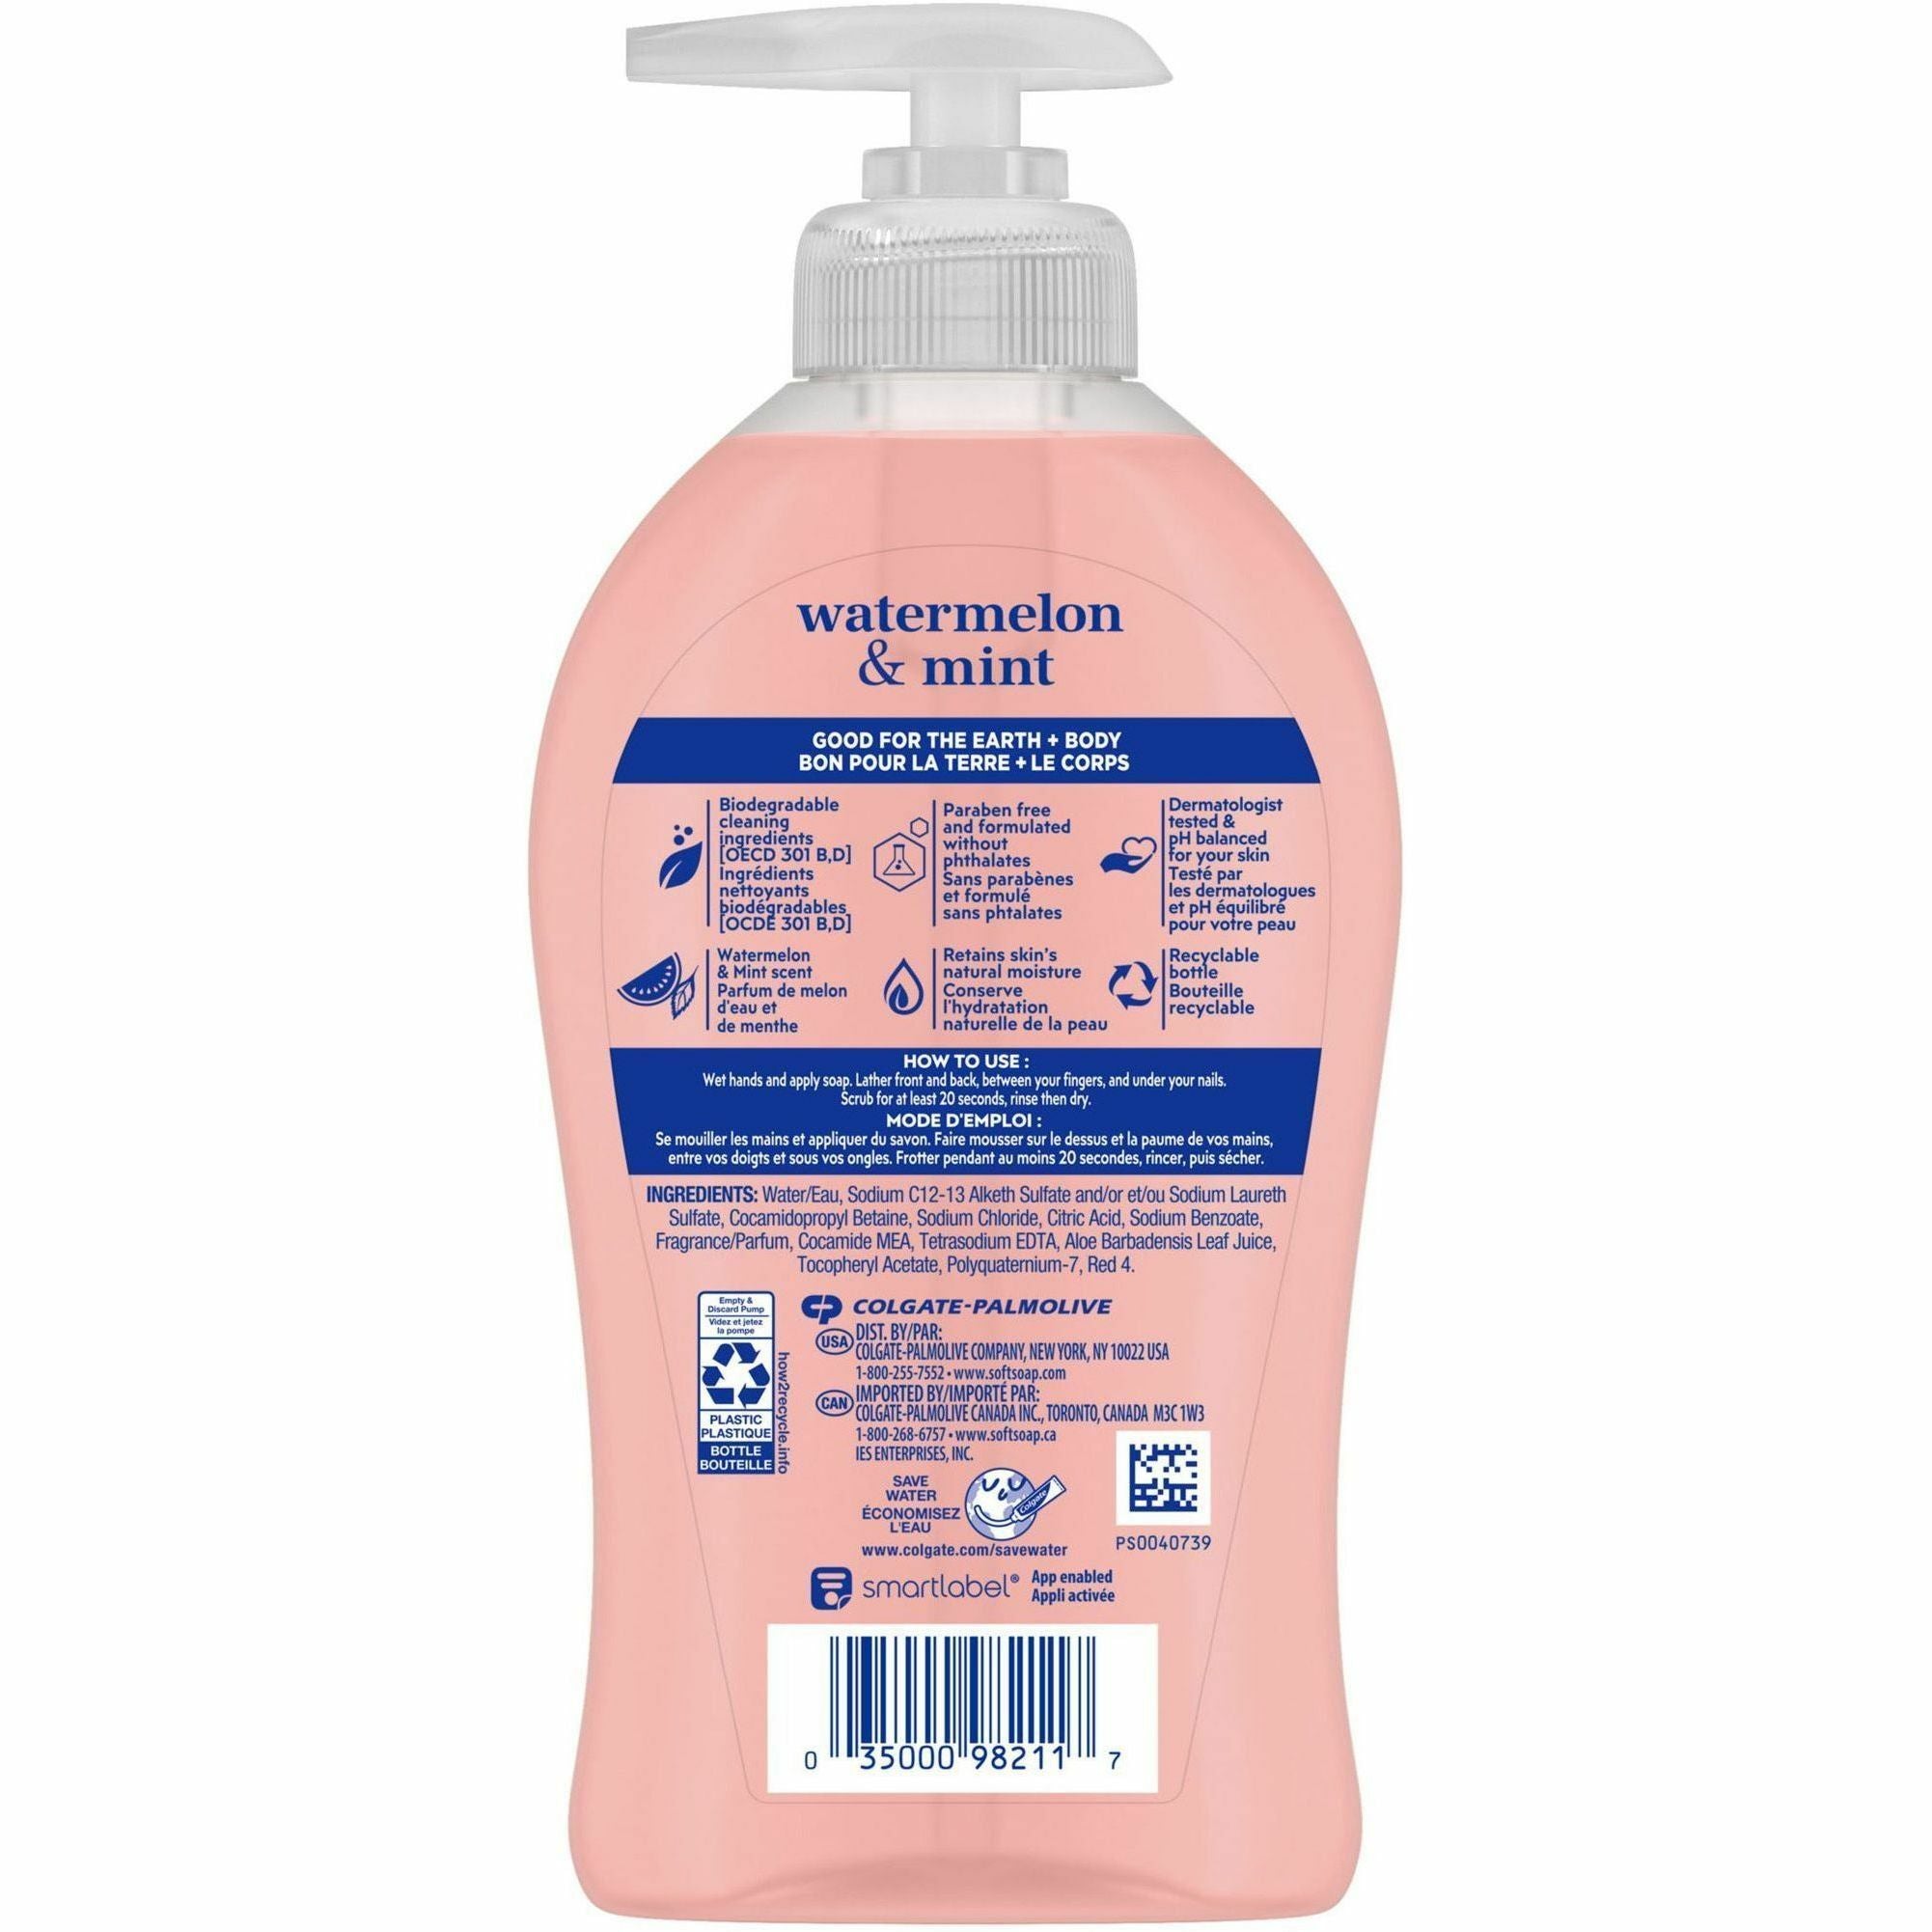 softsoap-watermelon-hand-soap-watermelon-&-mint-scentfor-113-fl-oz-3327-ml-pump-bottle-dispenser-bacteria-remover-dirt-remover-hand-skin-moisturizing-pink-refillable-recyclable-paraben-free-phthalate-free-biodegradable-1-e_cpcus07064a - 3